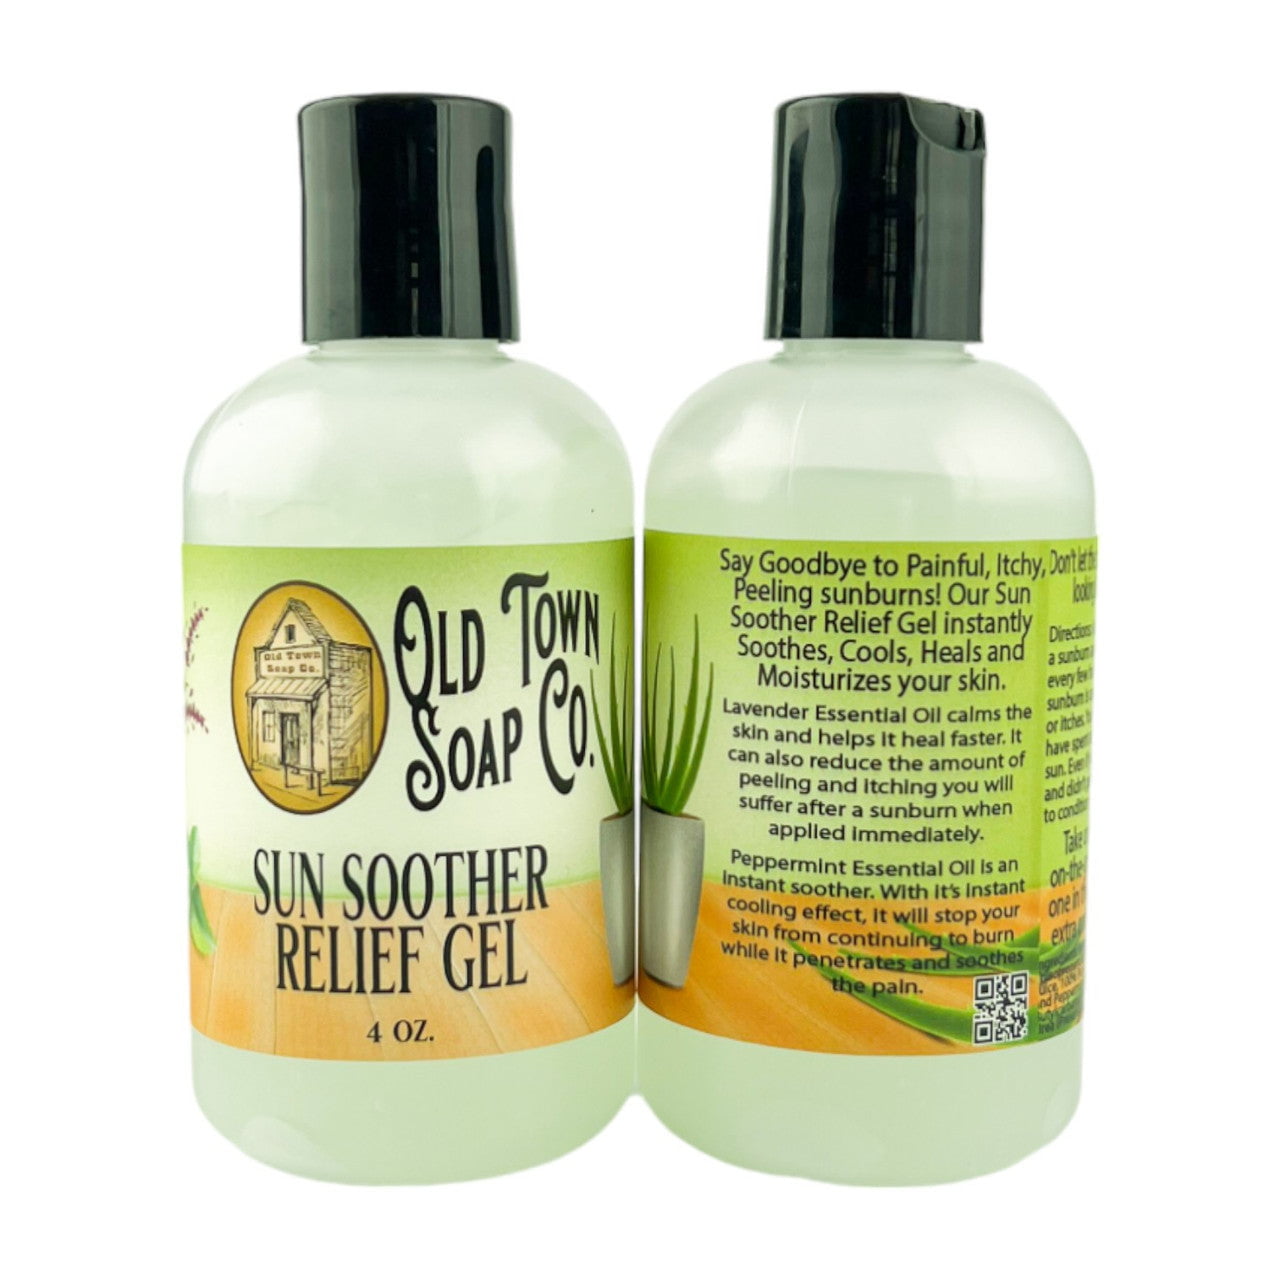 Sun Soother Relief Gel - Old Town Soap Co.